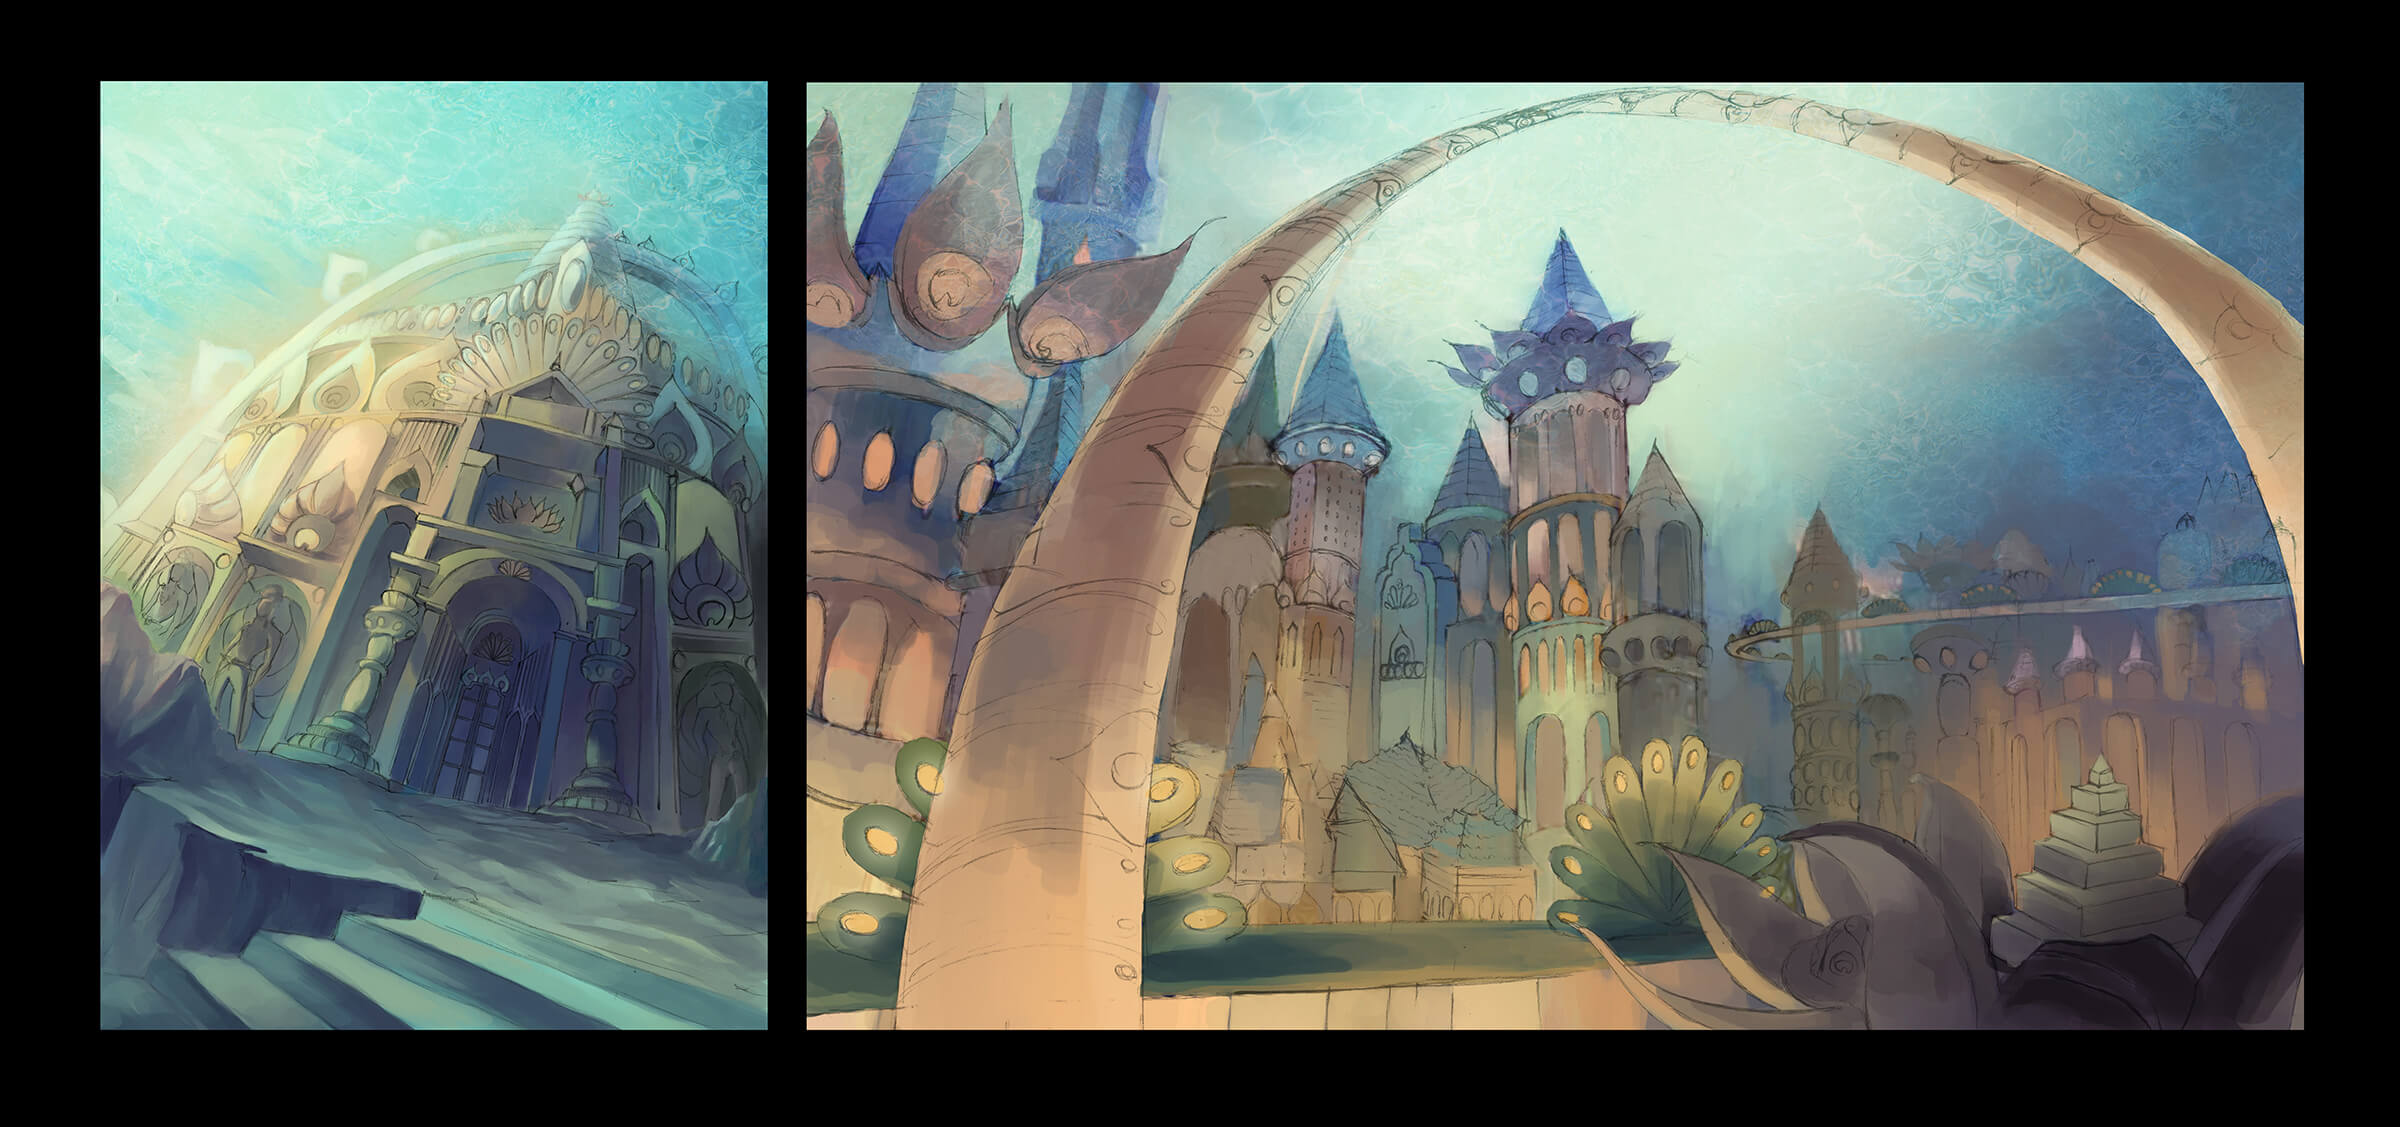 Two views of an underwater city colored in muted pastel tones, full of towers, arches, and massive, ornate buildings.